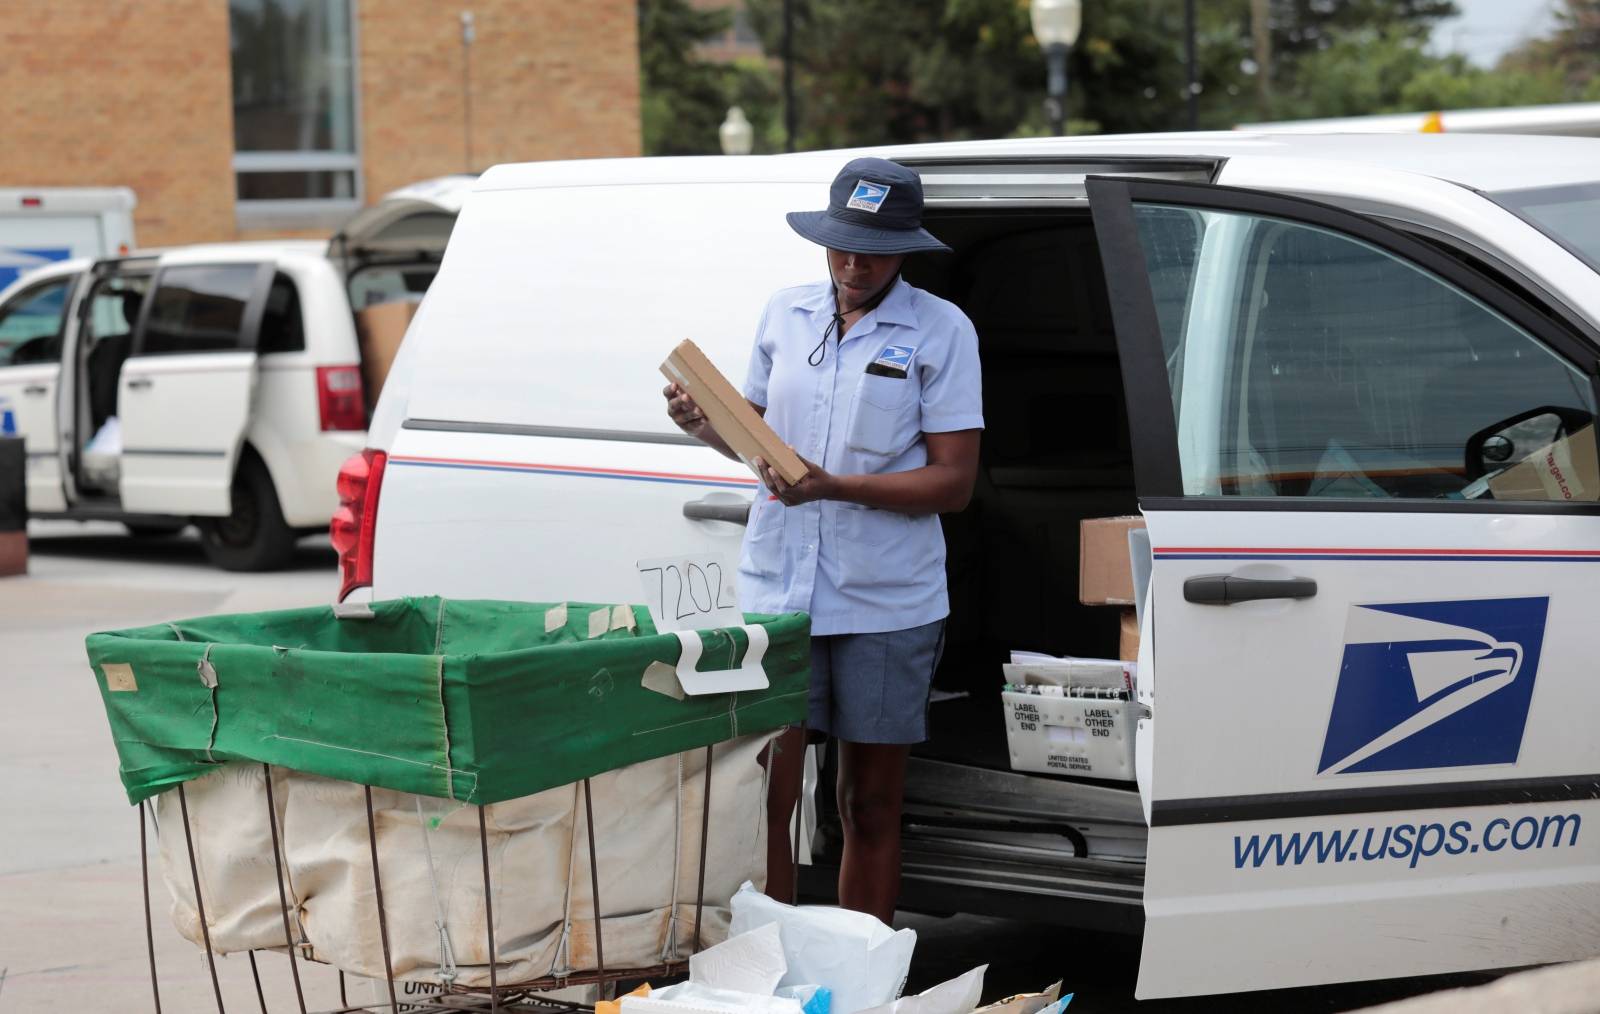 A United States Postal Service (USPS) worker loads mail into a delivery truck